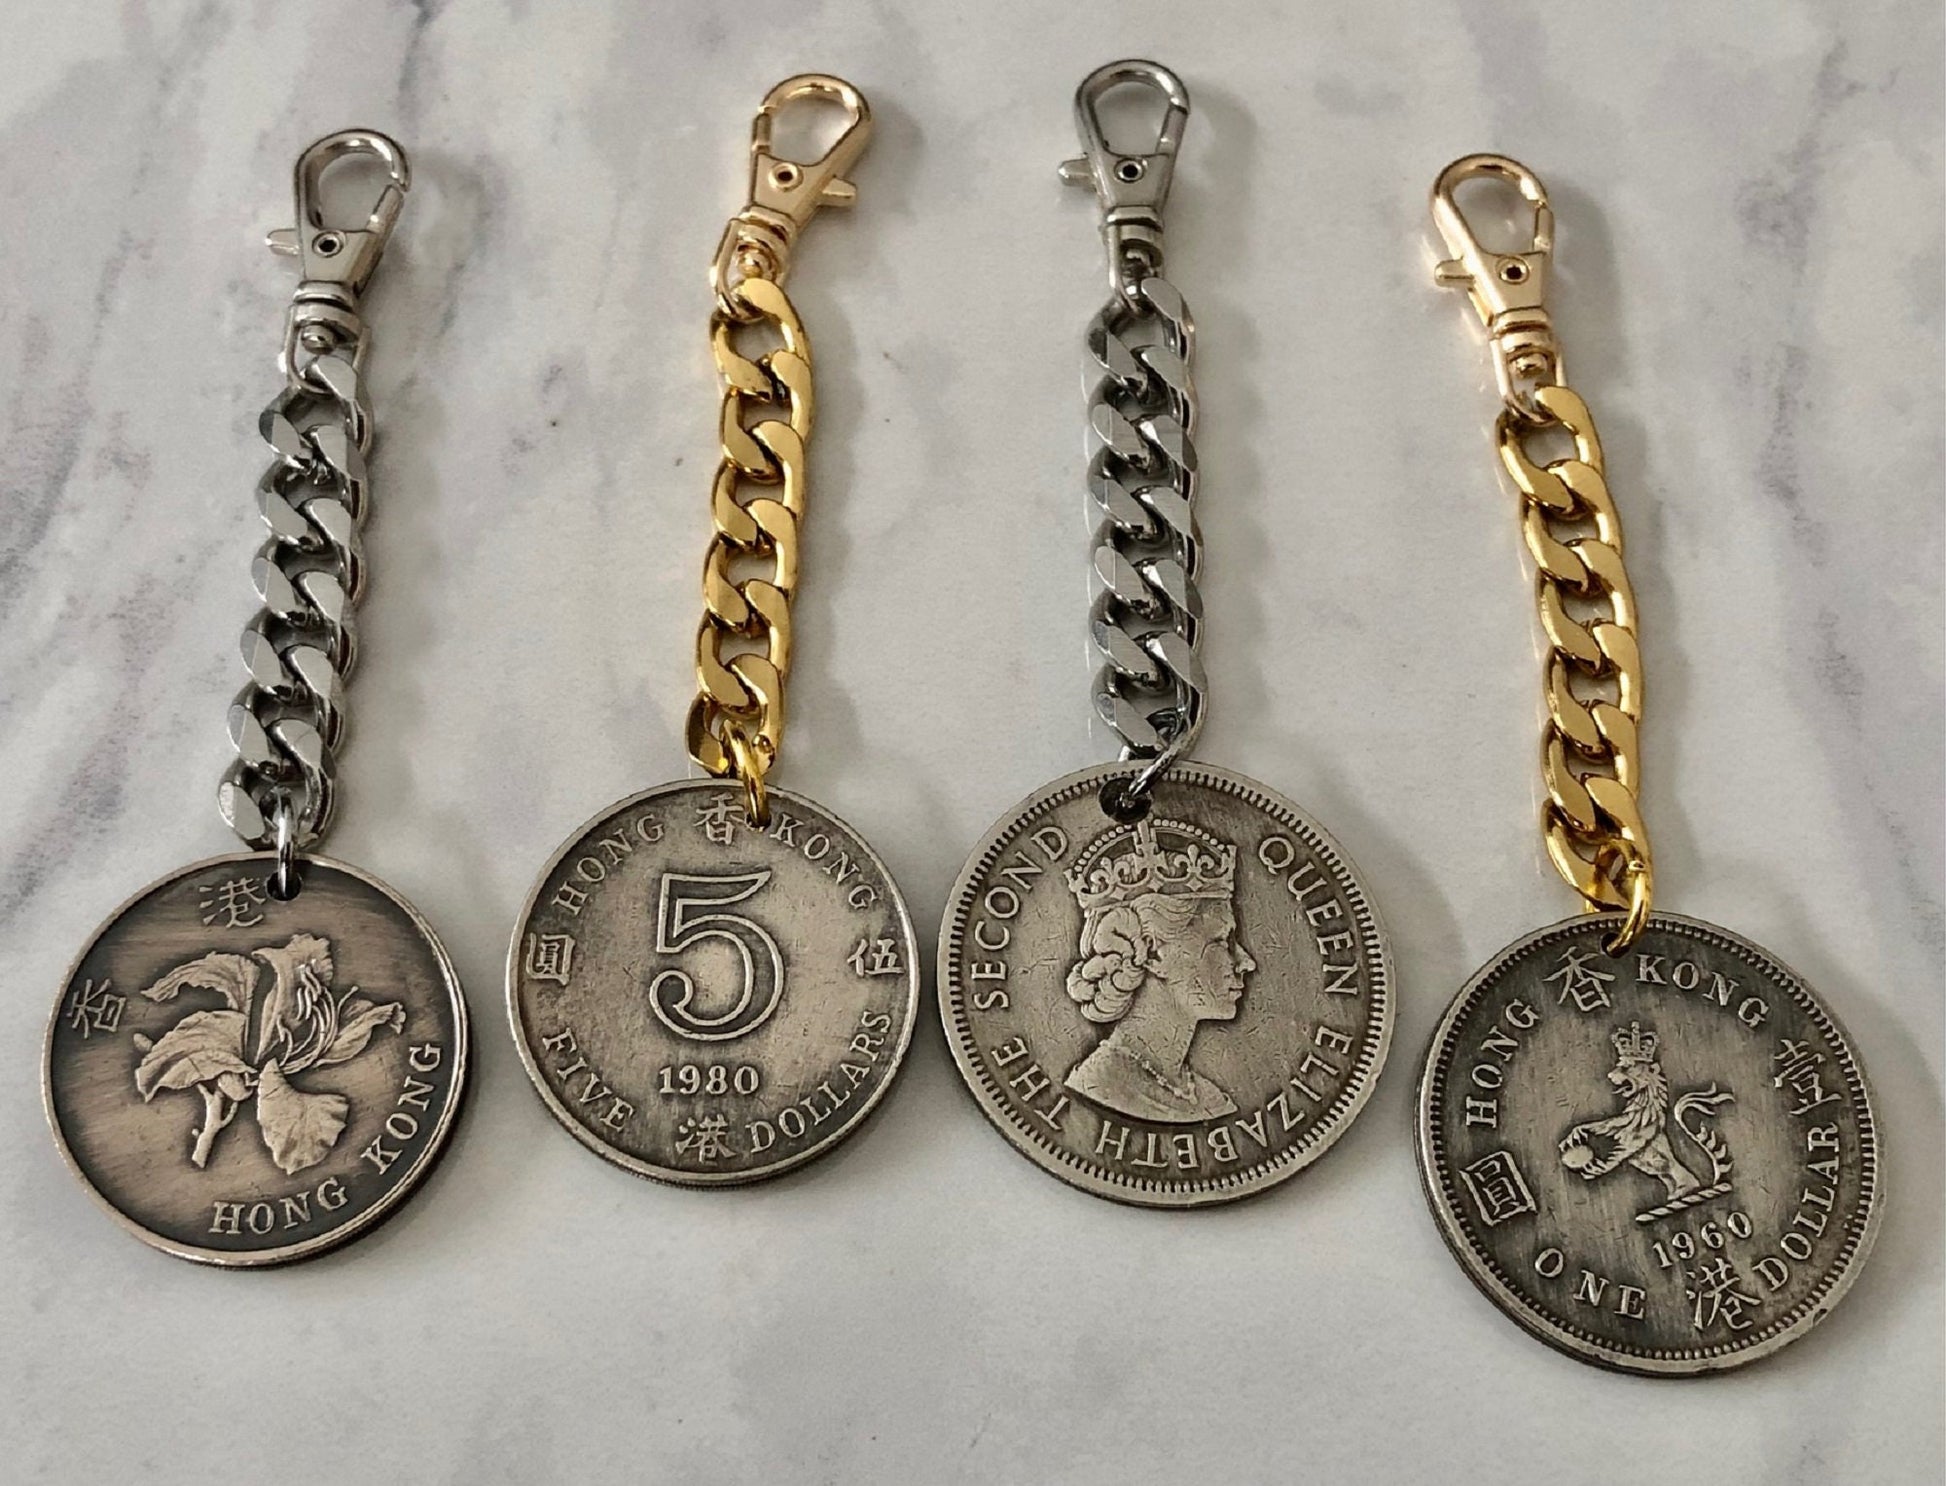 Hong Kong Coin Zipper Pull, China, Chines, Rare, Coin Enthusiast, Jacket, Back Pack, Luggage, Tent, Sleeping Bag, Purse, Clutch